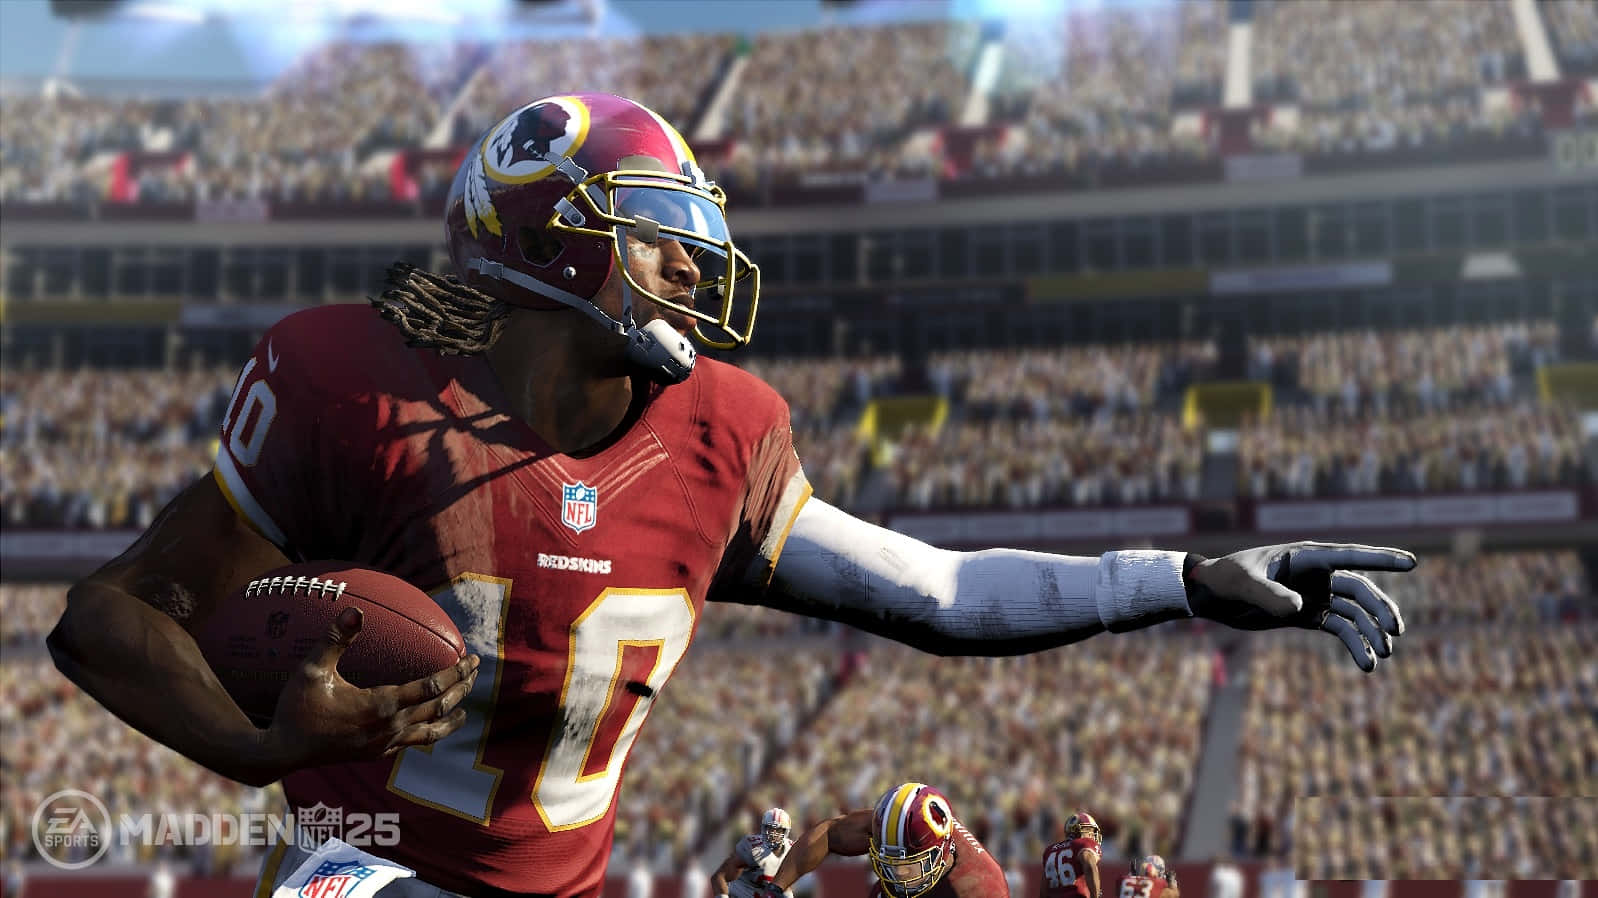 Intense action on the field in Madden NFL 22 Wallpaper